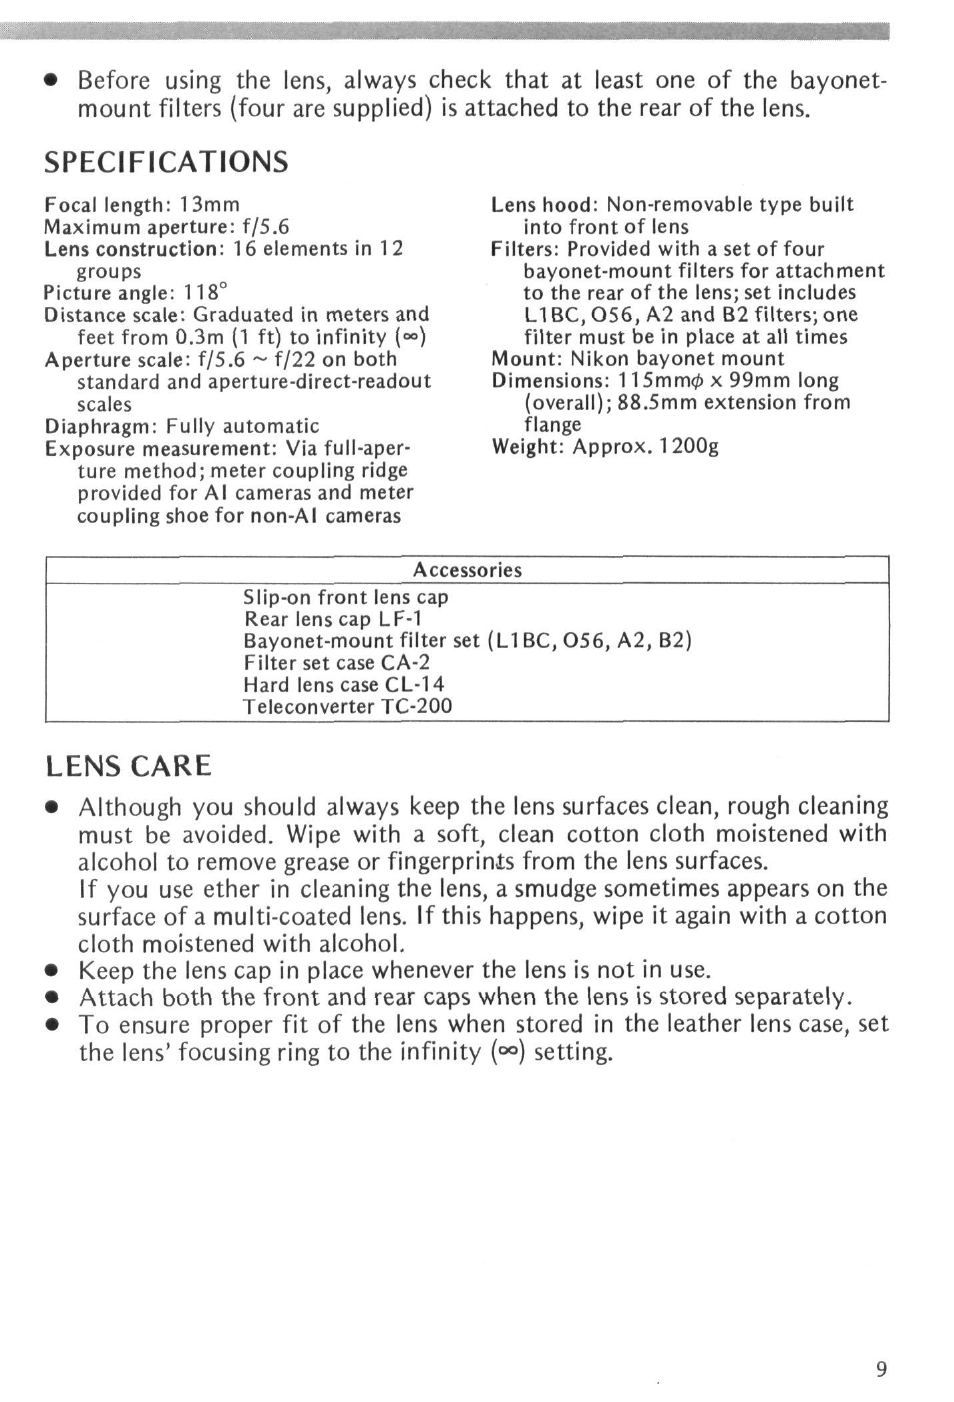 Specifications, Lens care | Nikon NIKKOR 13mm f-5.6 User Manual | Page 9 / 20